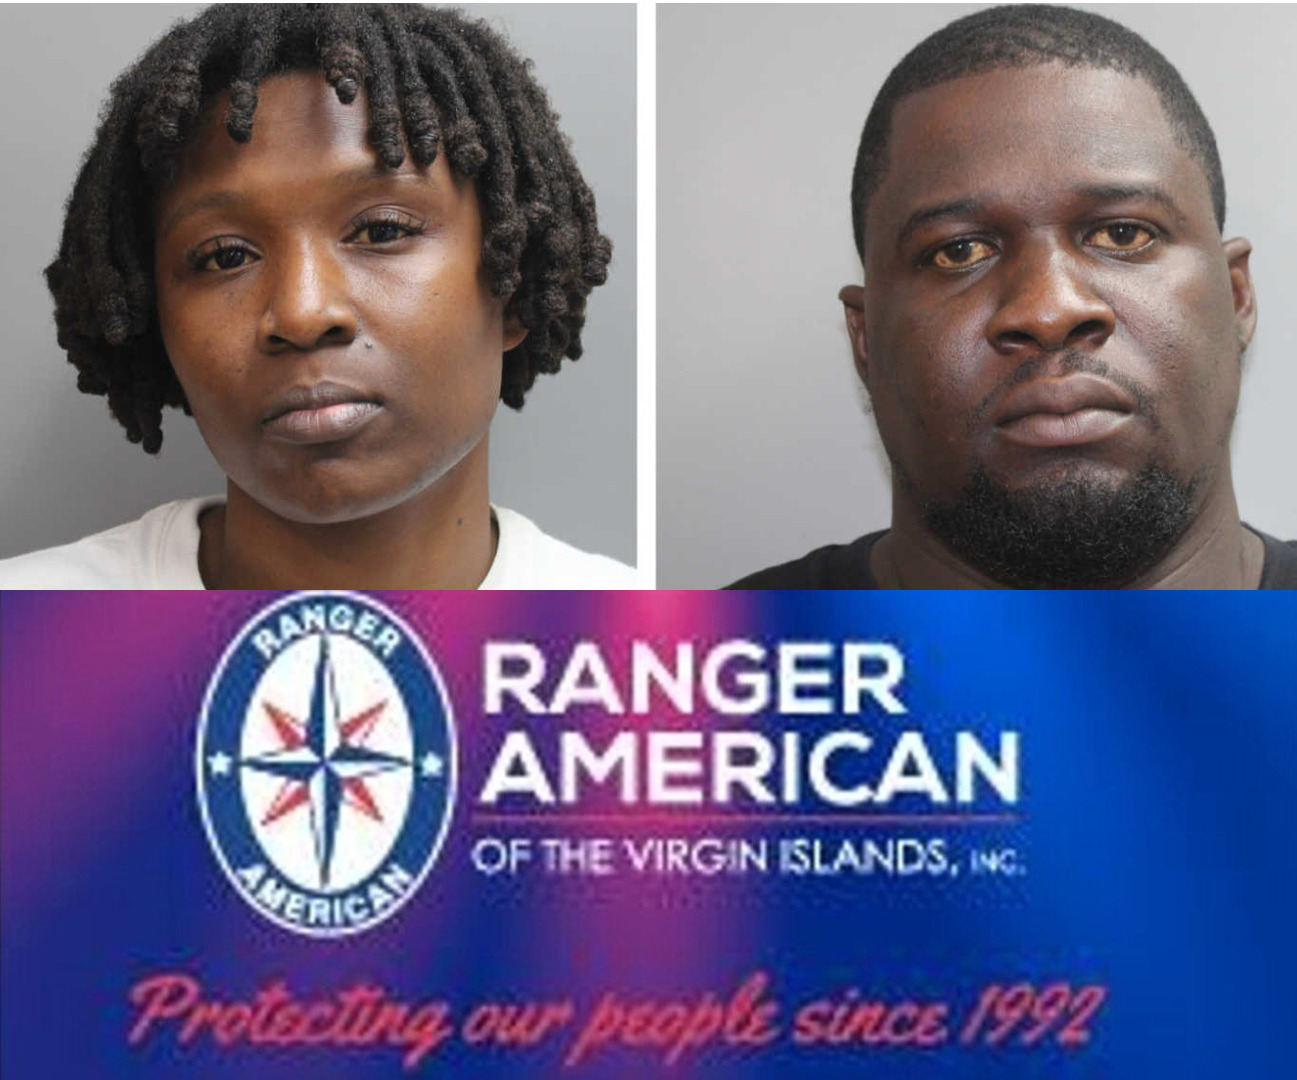 Ranger American Power Couple In Hot Water Over Repeated Assaults Of Each Other: VIPD